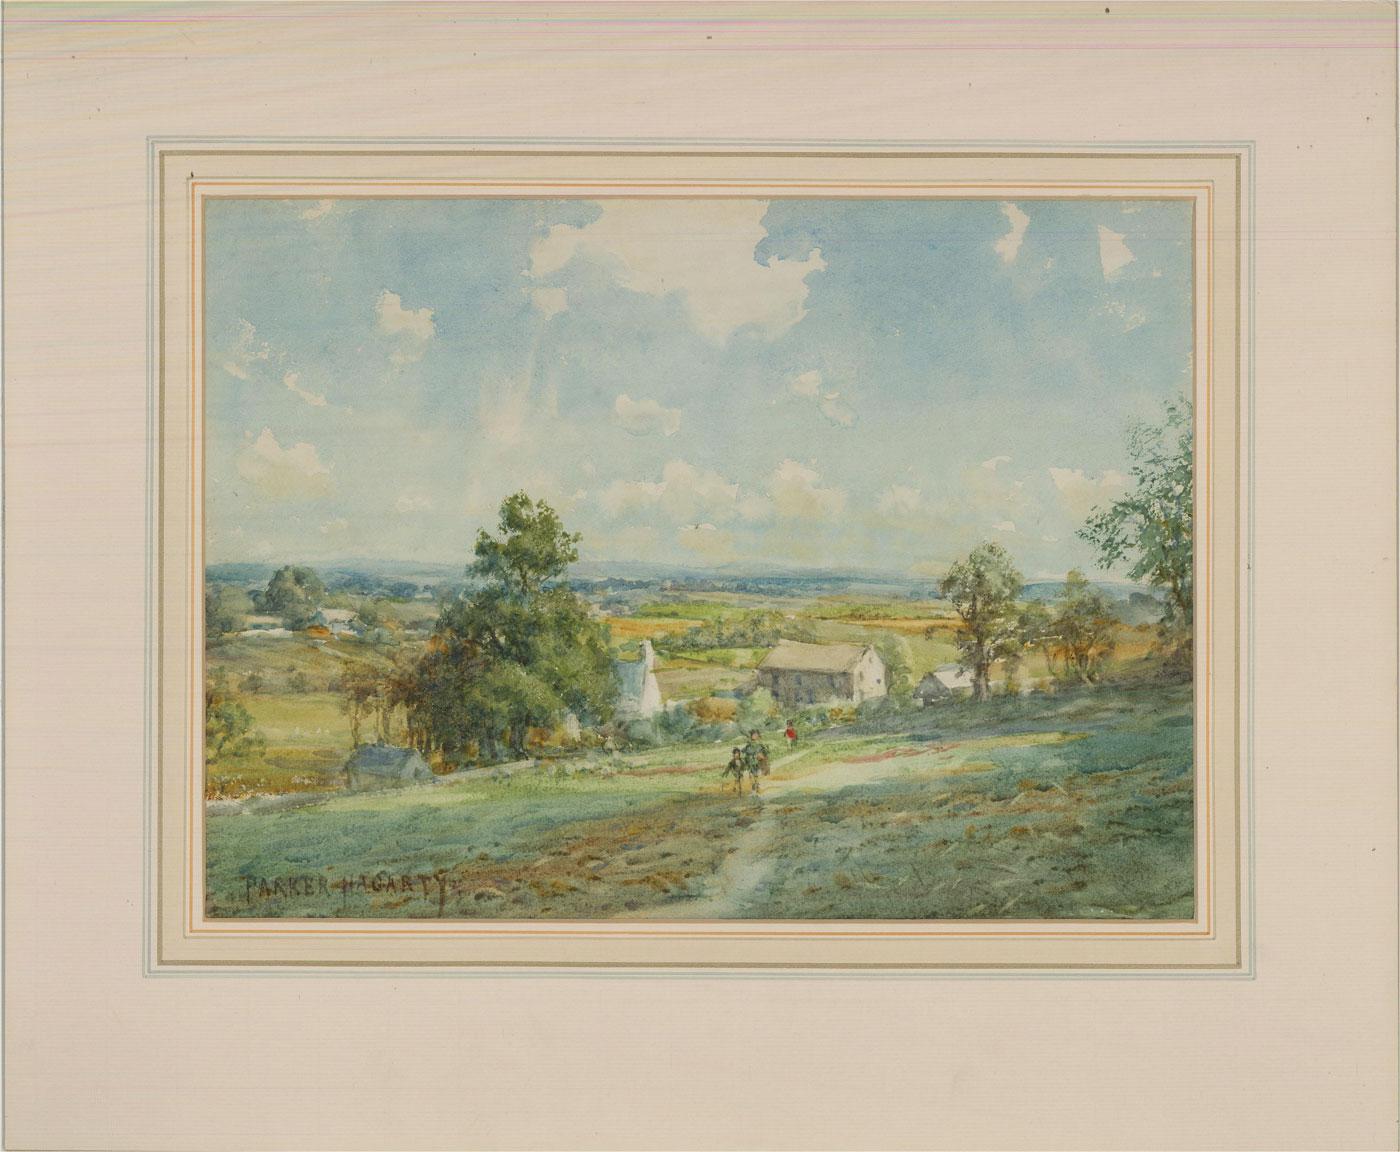 Parker Hagarty - Signed Early 20th Century Watercolour, Rural Scene For Sale 1